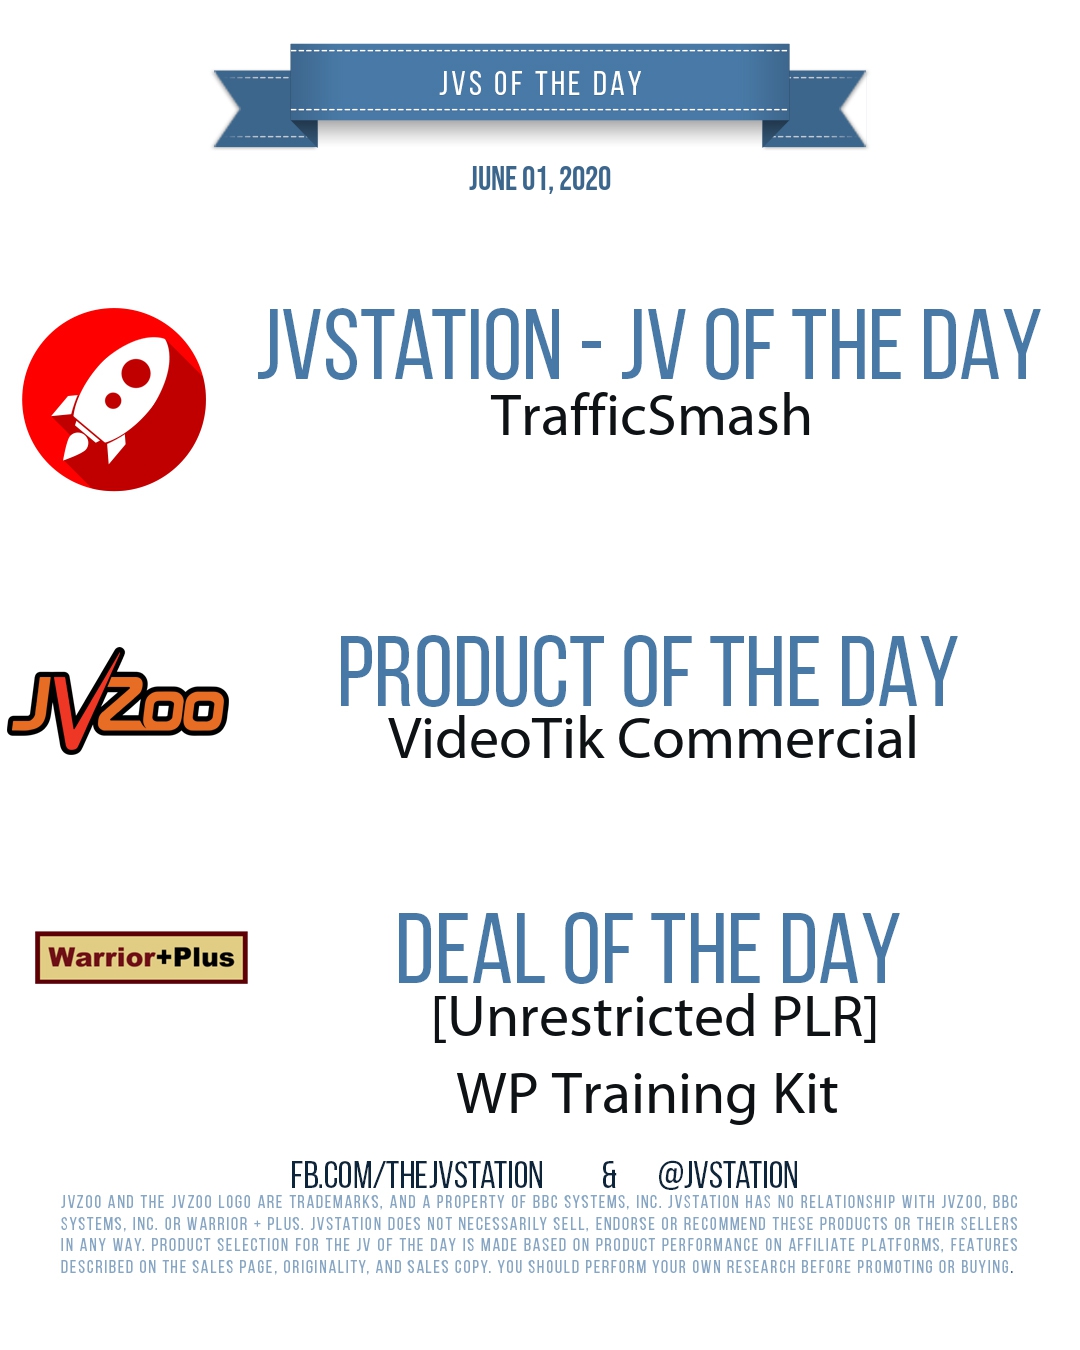 JVs of the day - June 01, 2020